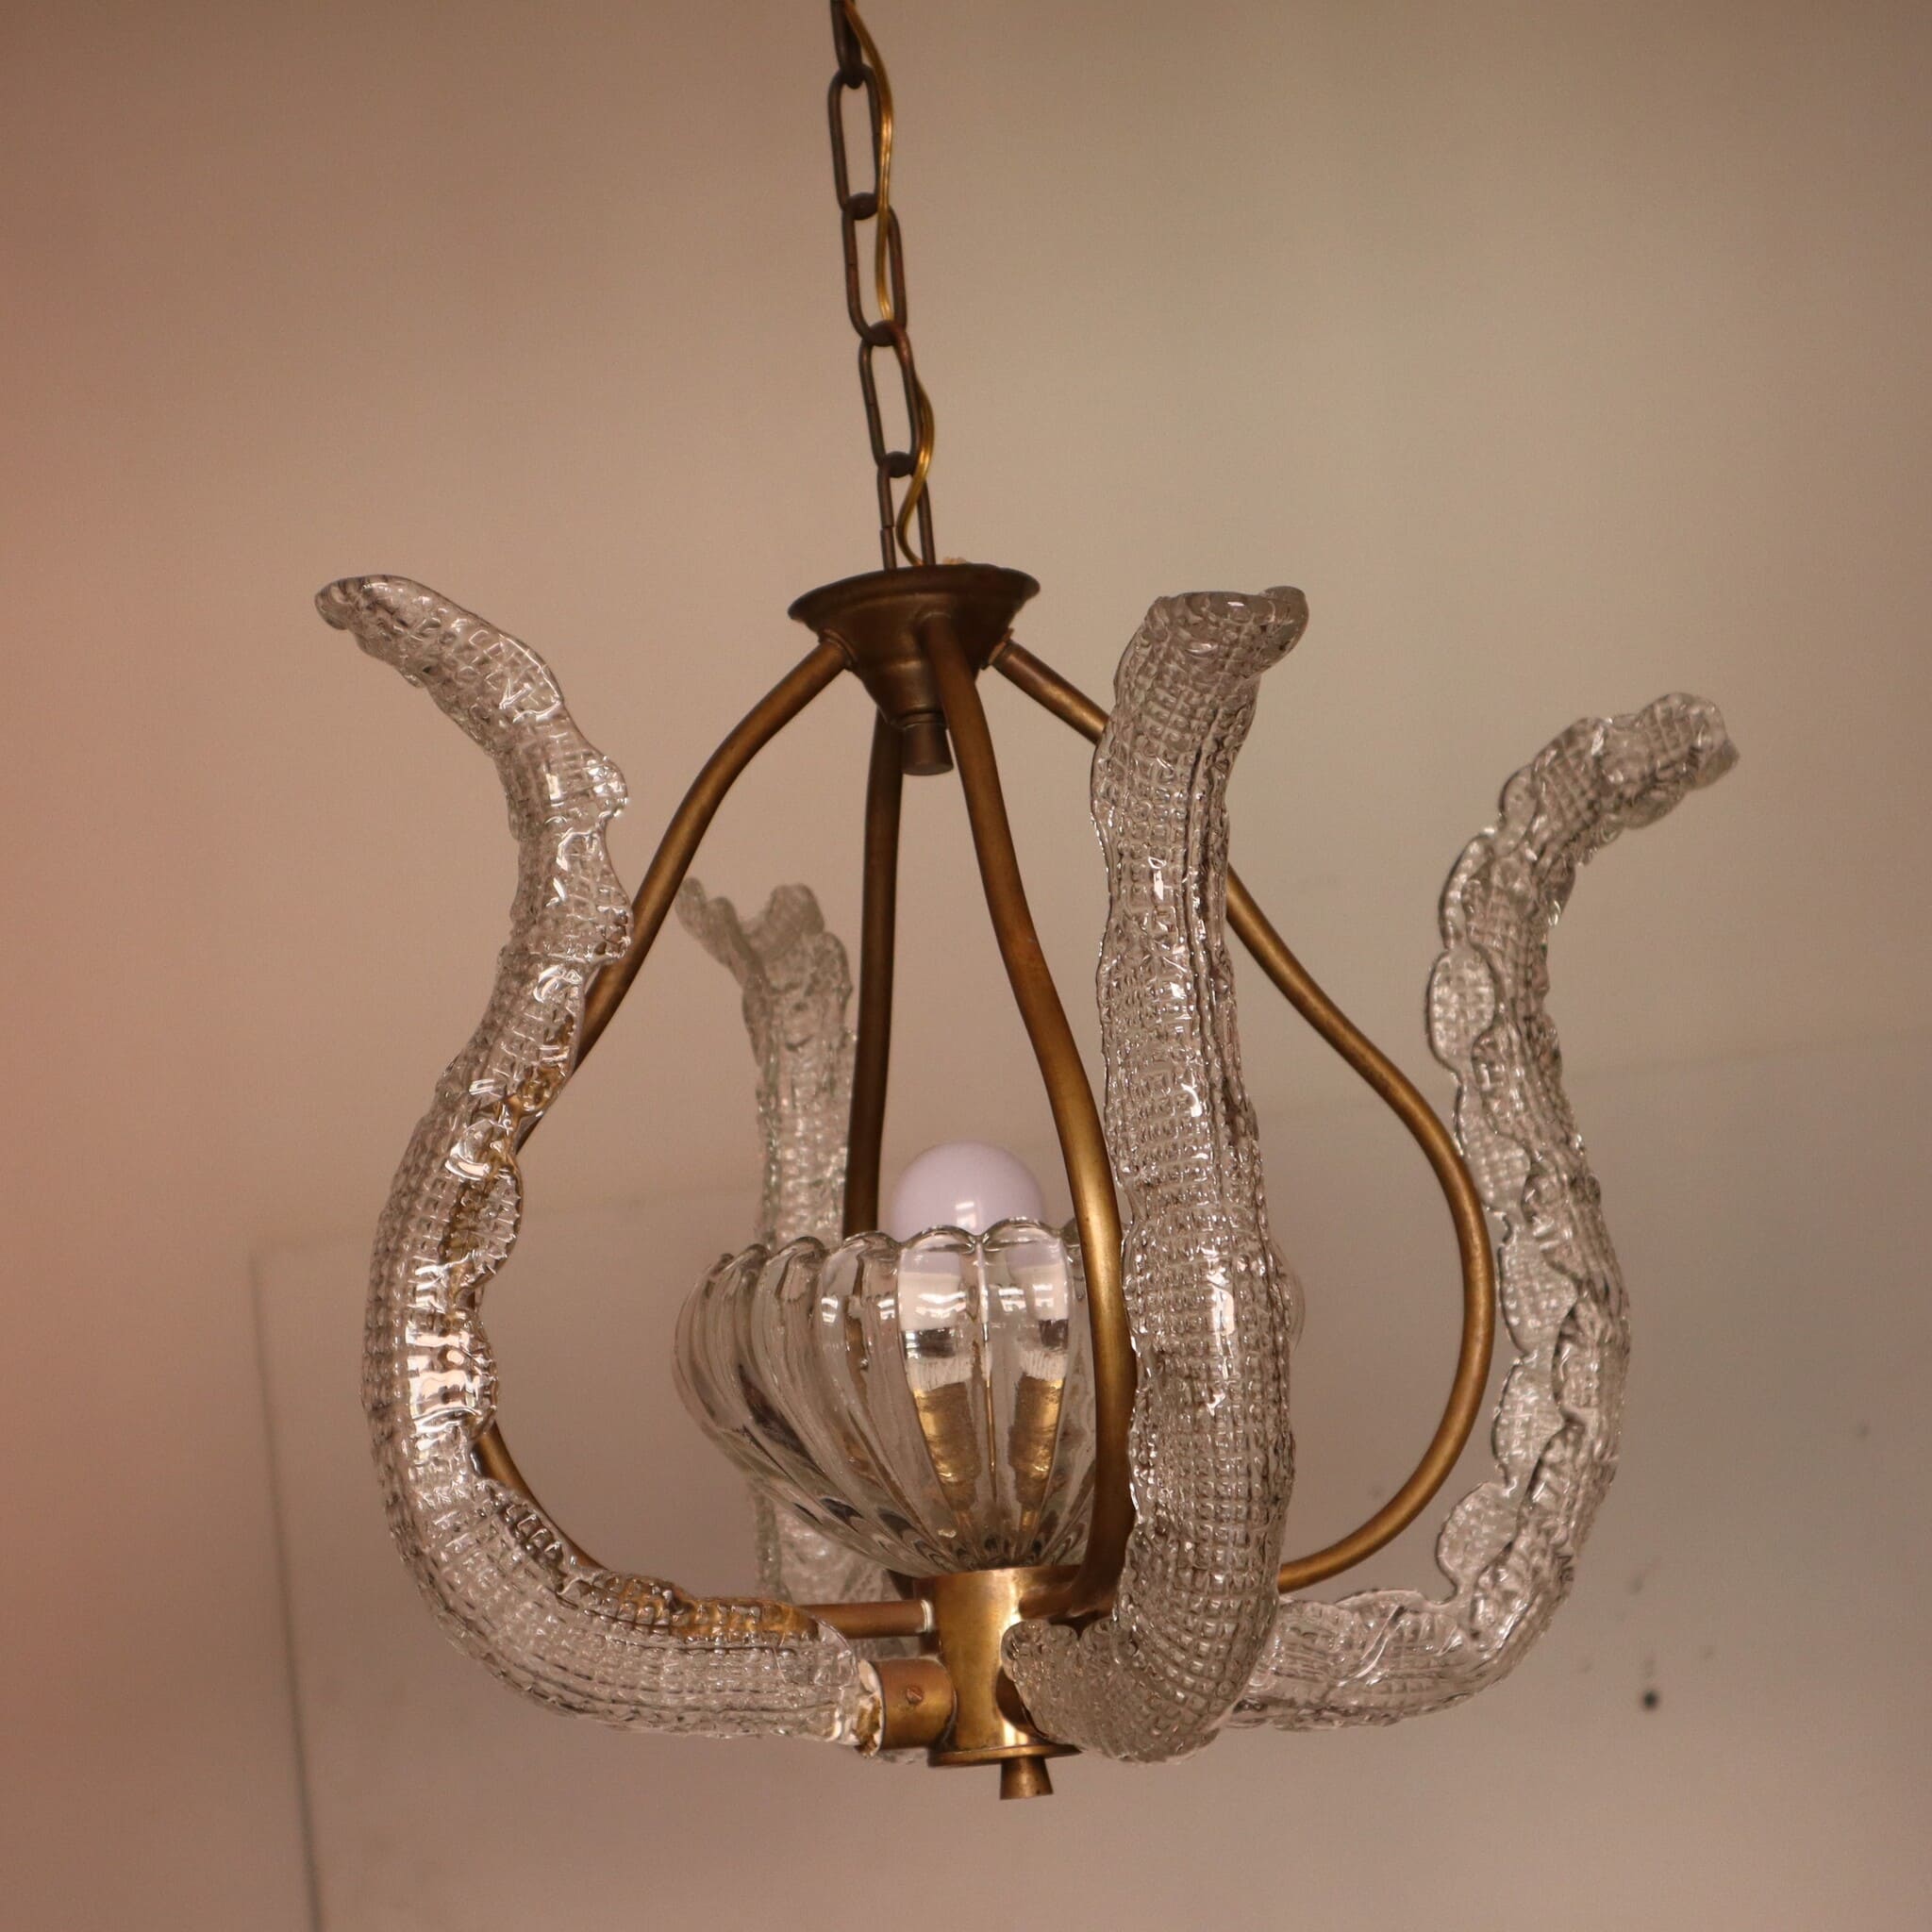 visionidepoca-modern-art-barovier-chandelier-1940s-art-deco-4-arms-in-murano-glass-vintage-full-view-natural-light